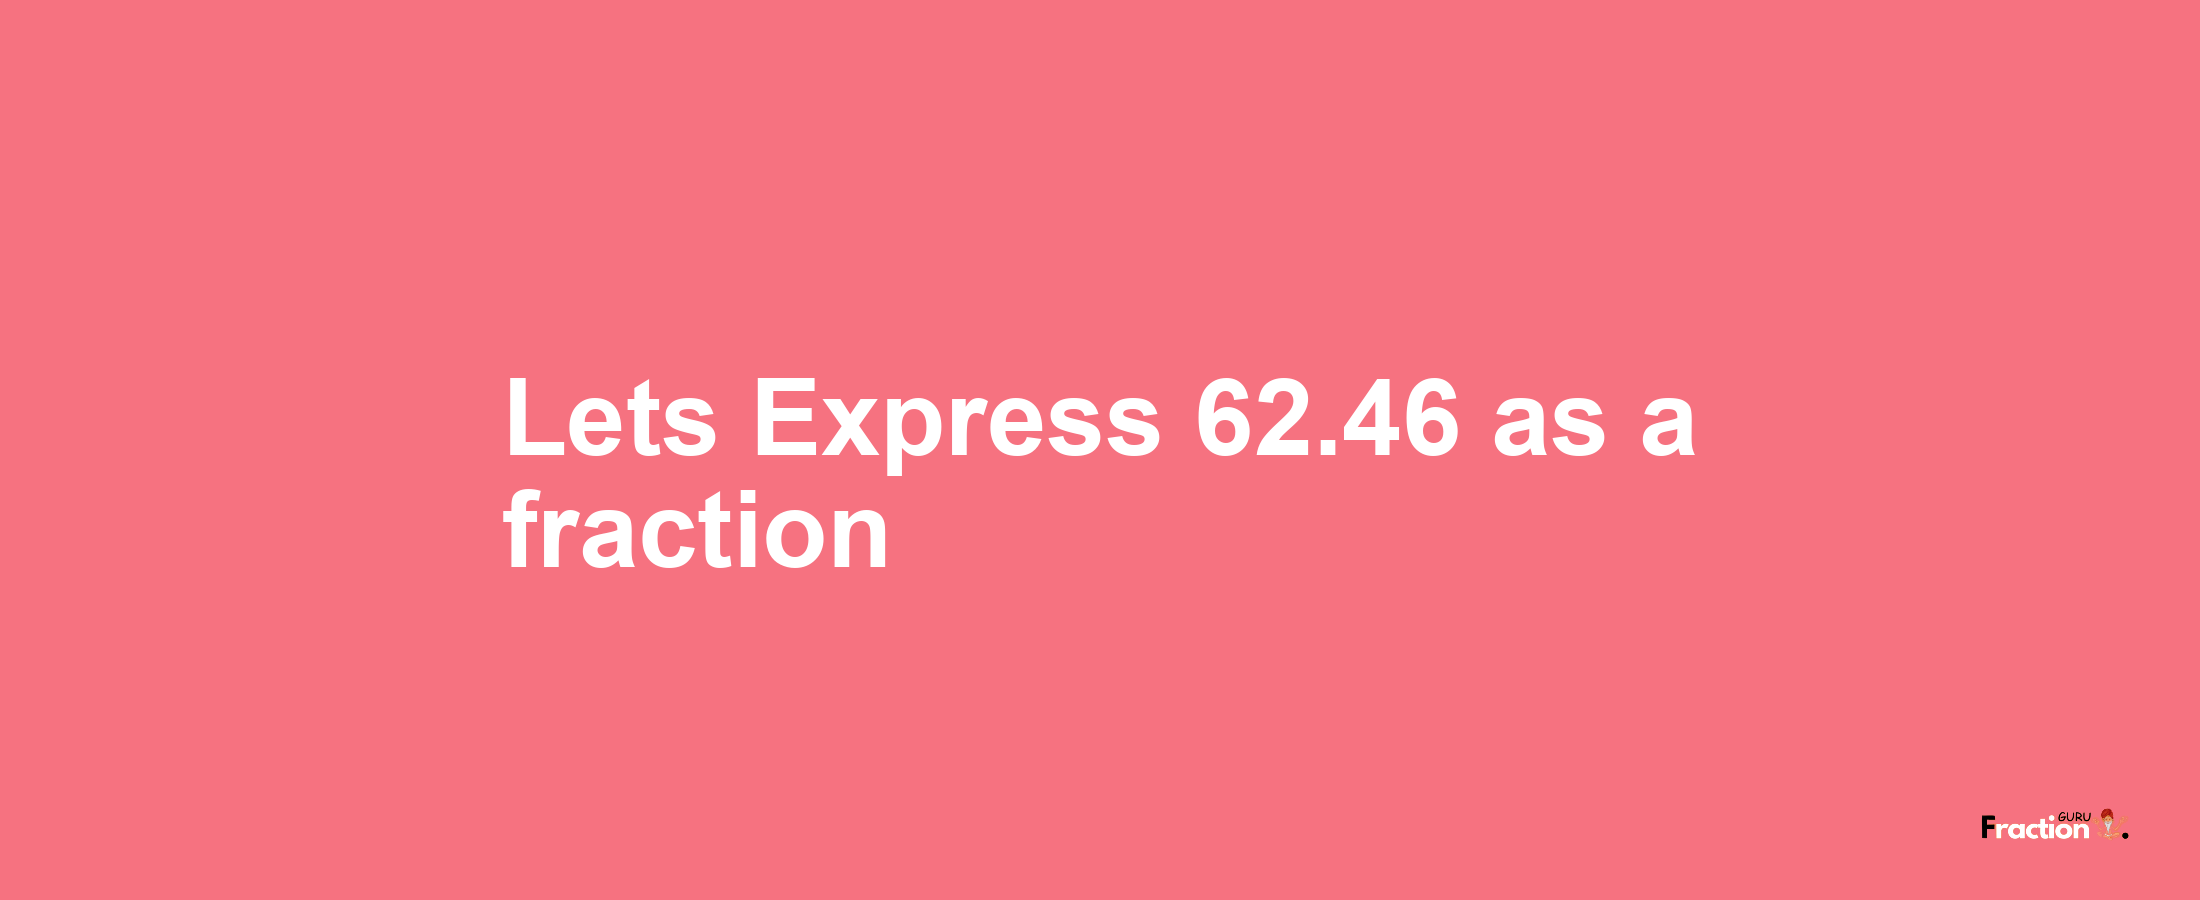 Lets Express 62.46 as afraction